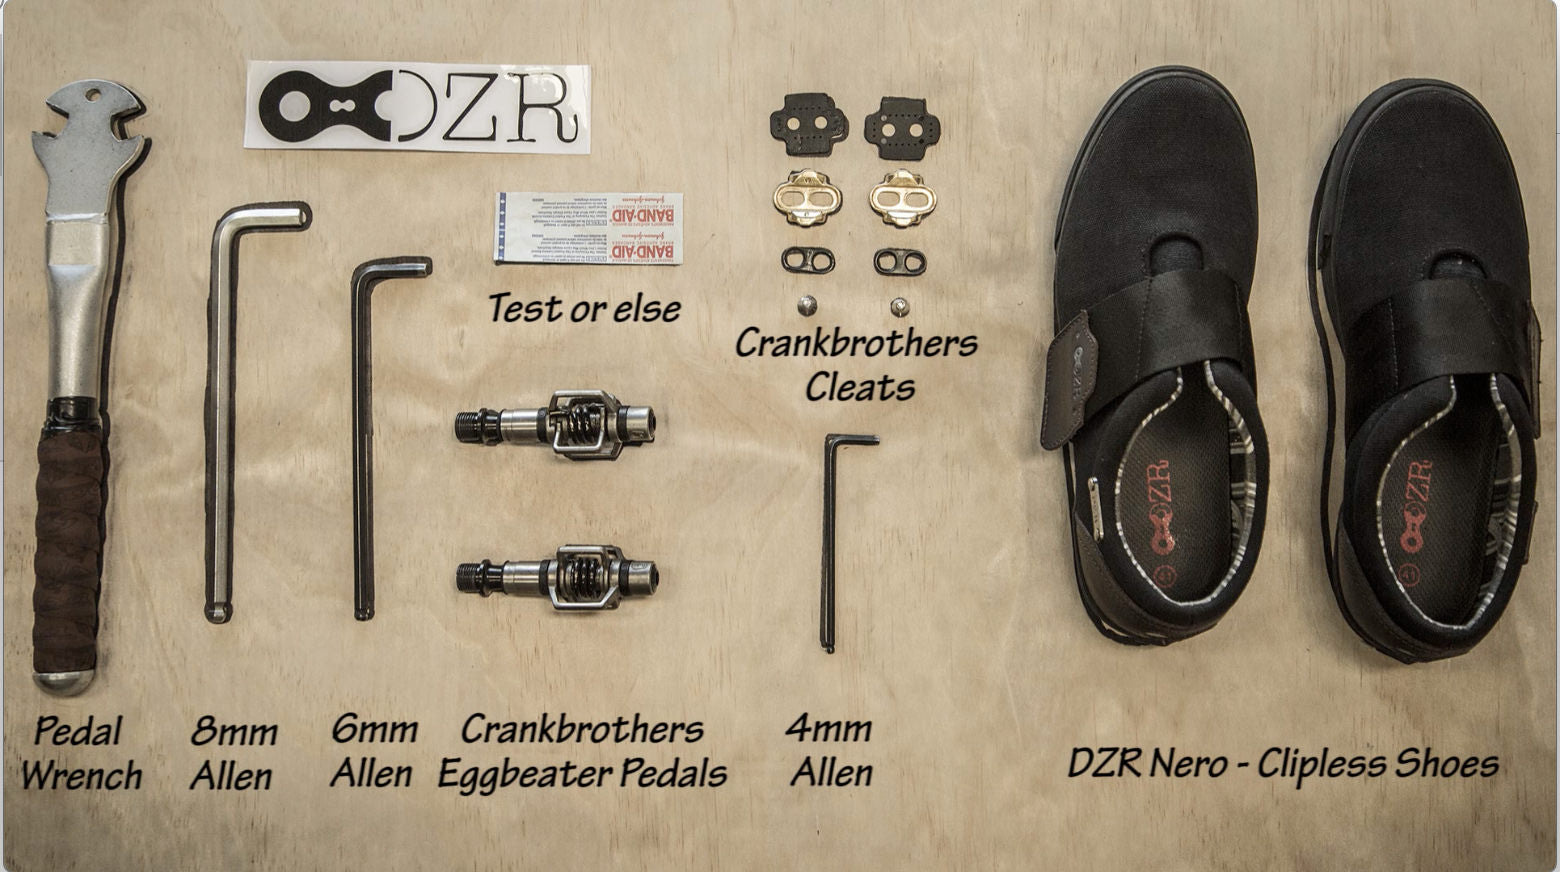 How to setup Clipless Pedals - DZR Shoes